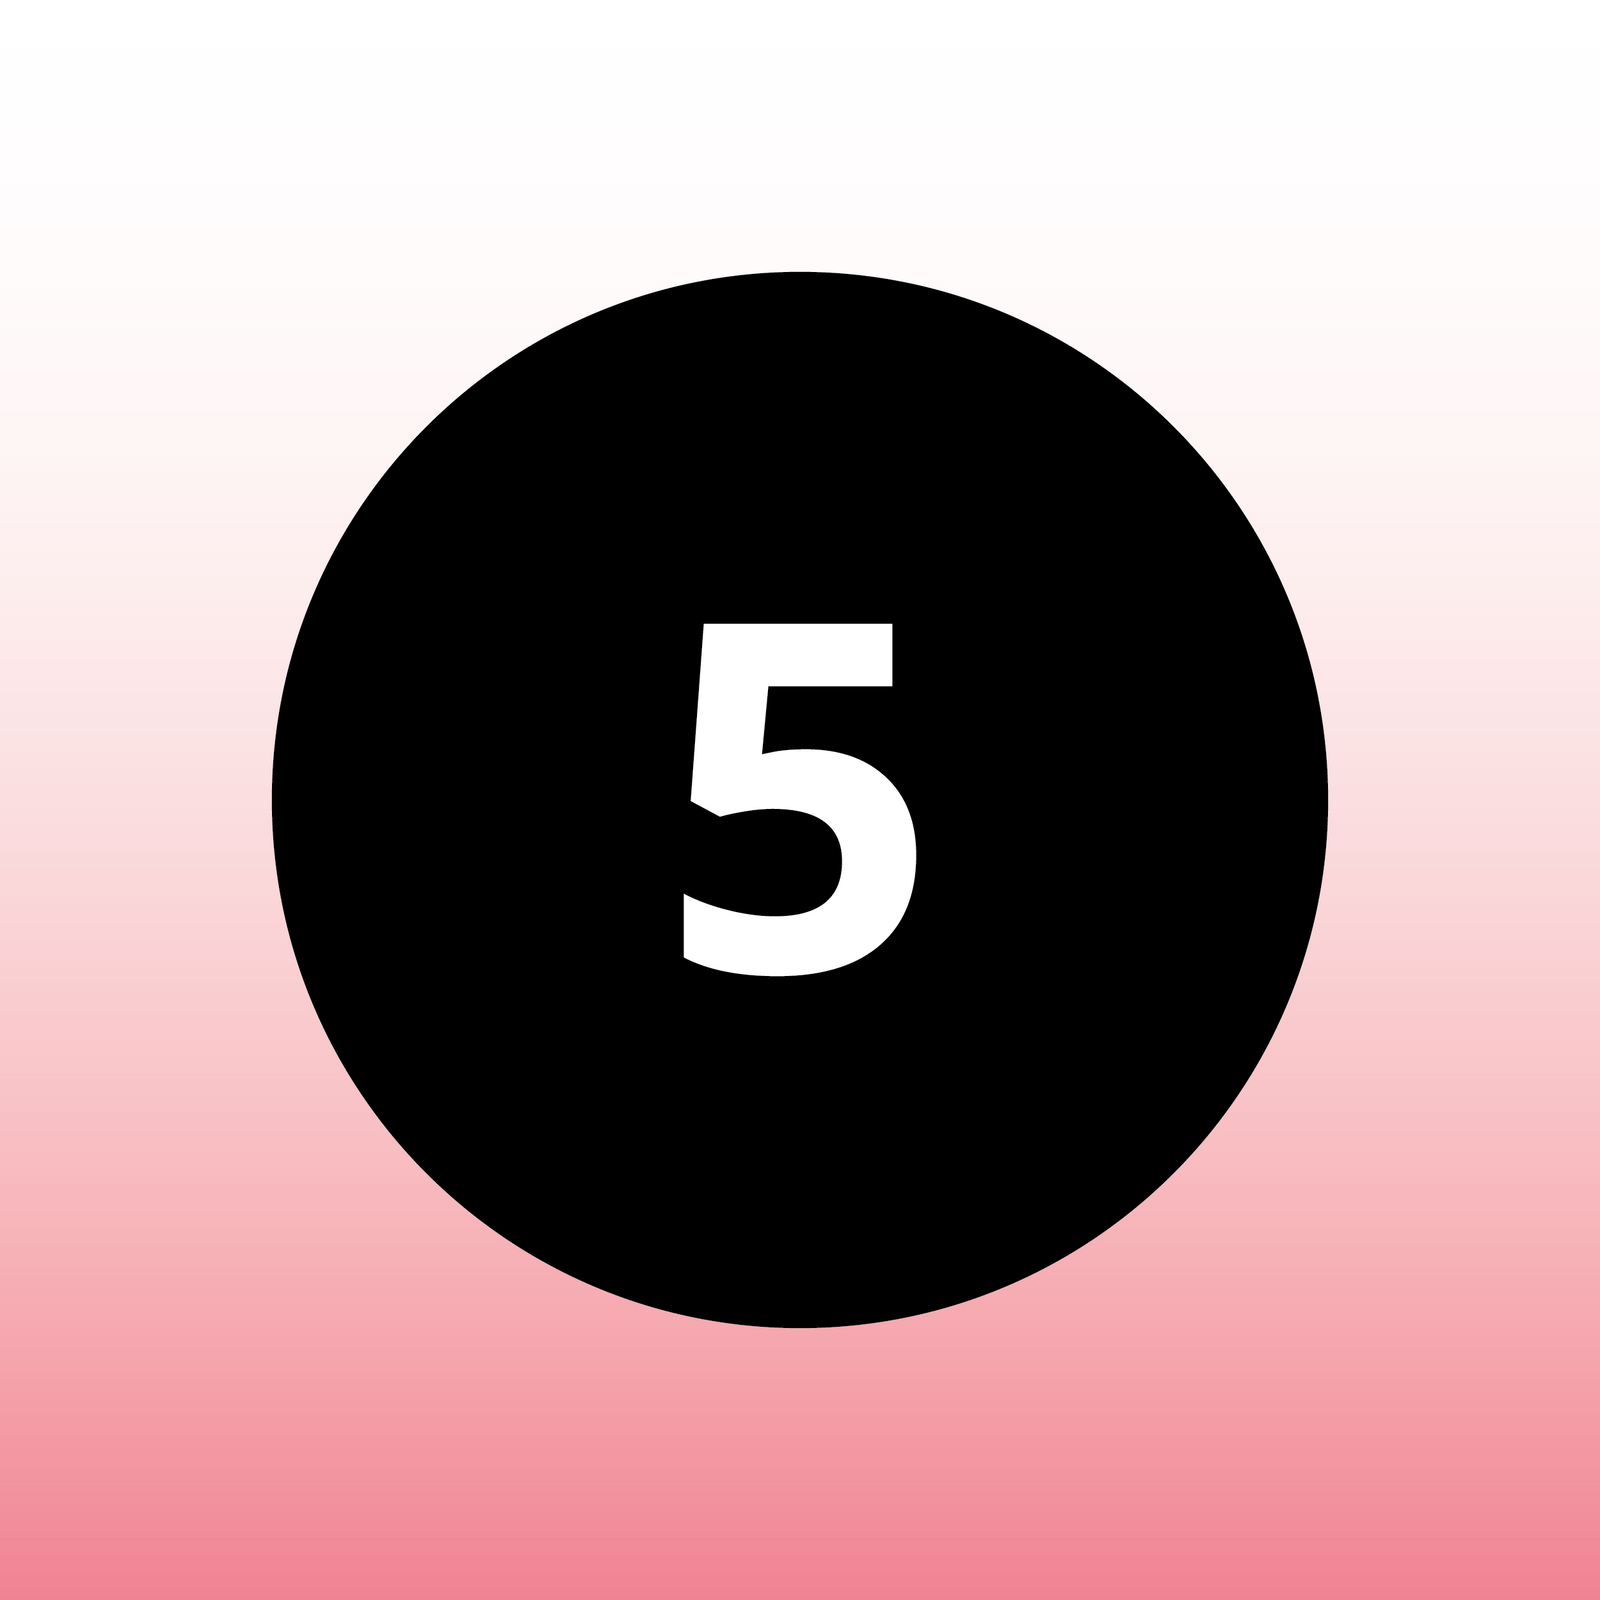 Number 5 with a black circle and a pink gradient.